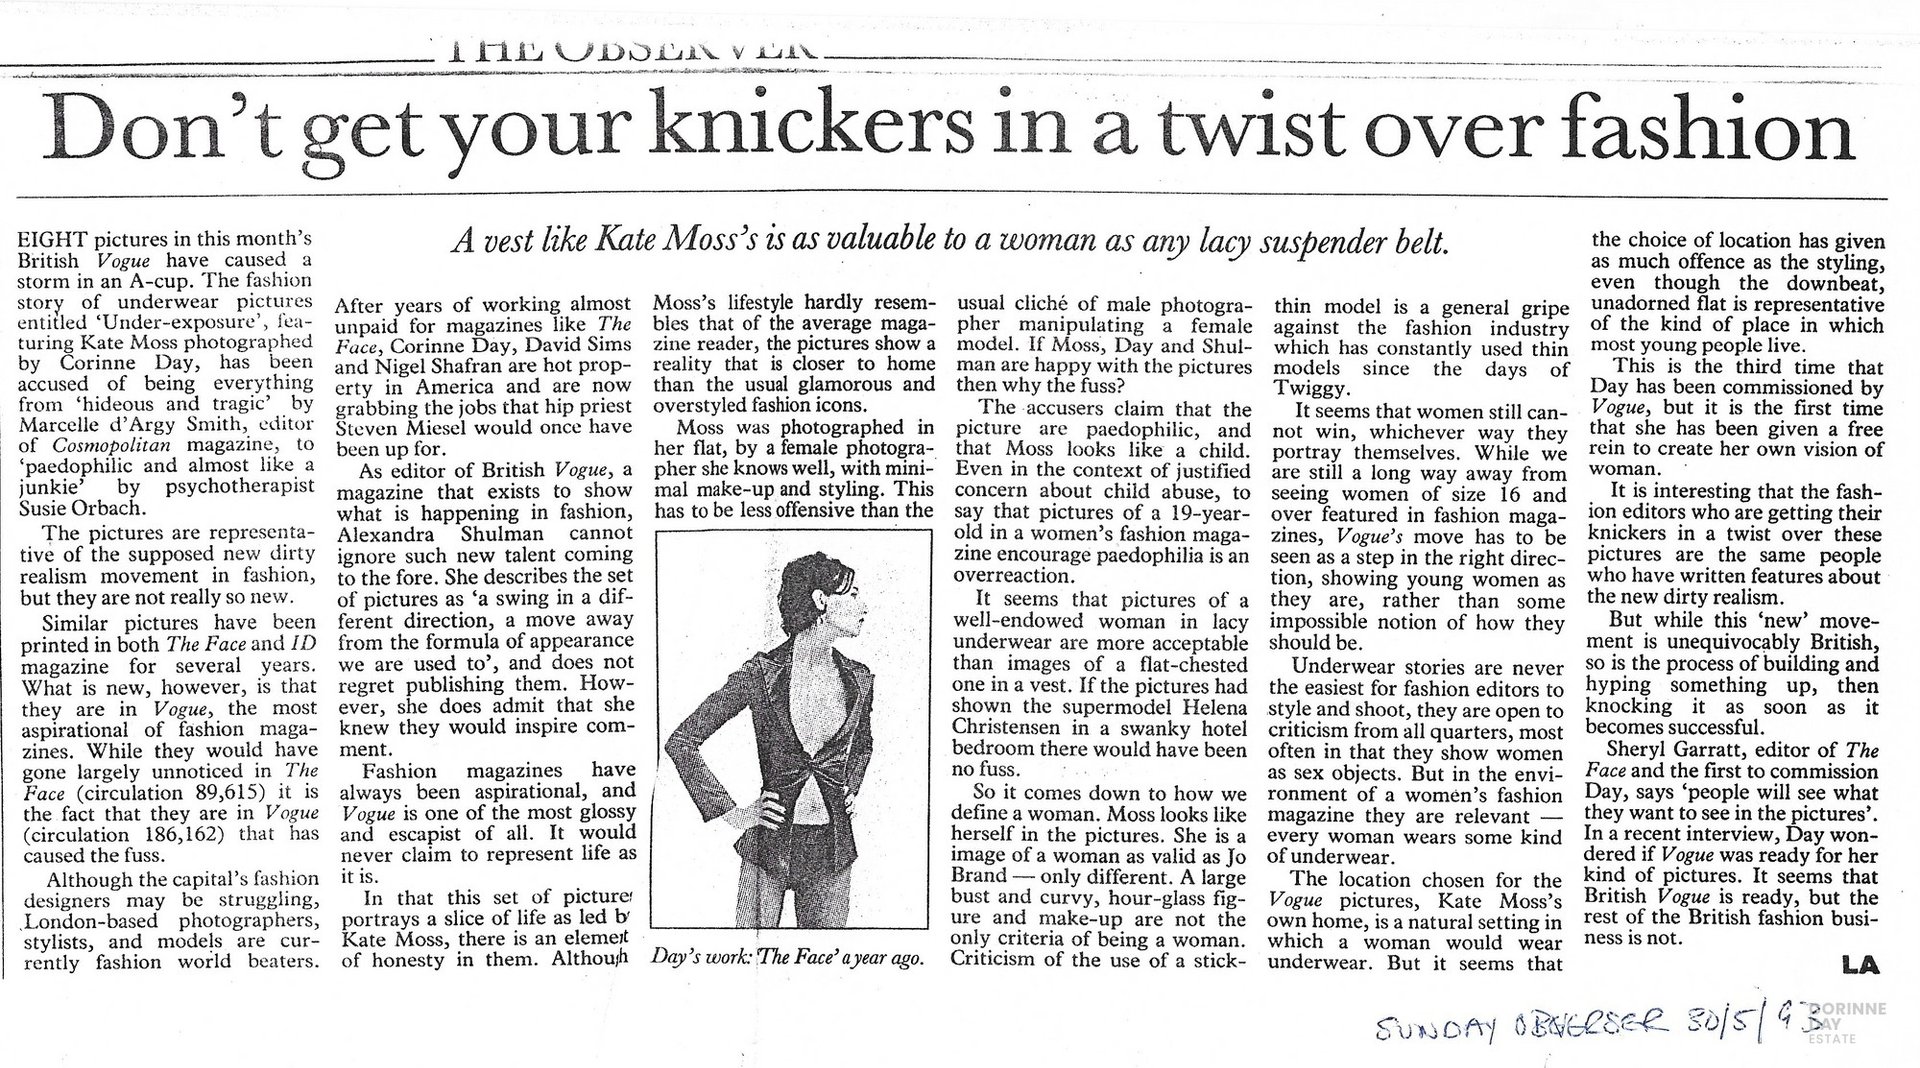 Don't get your knickers in a twist, The Observer, 30 May 1993 — Image 1 of 1